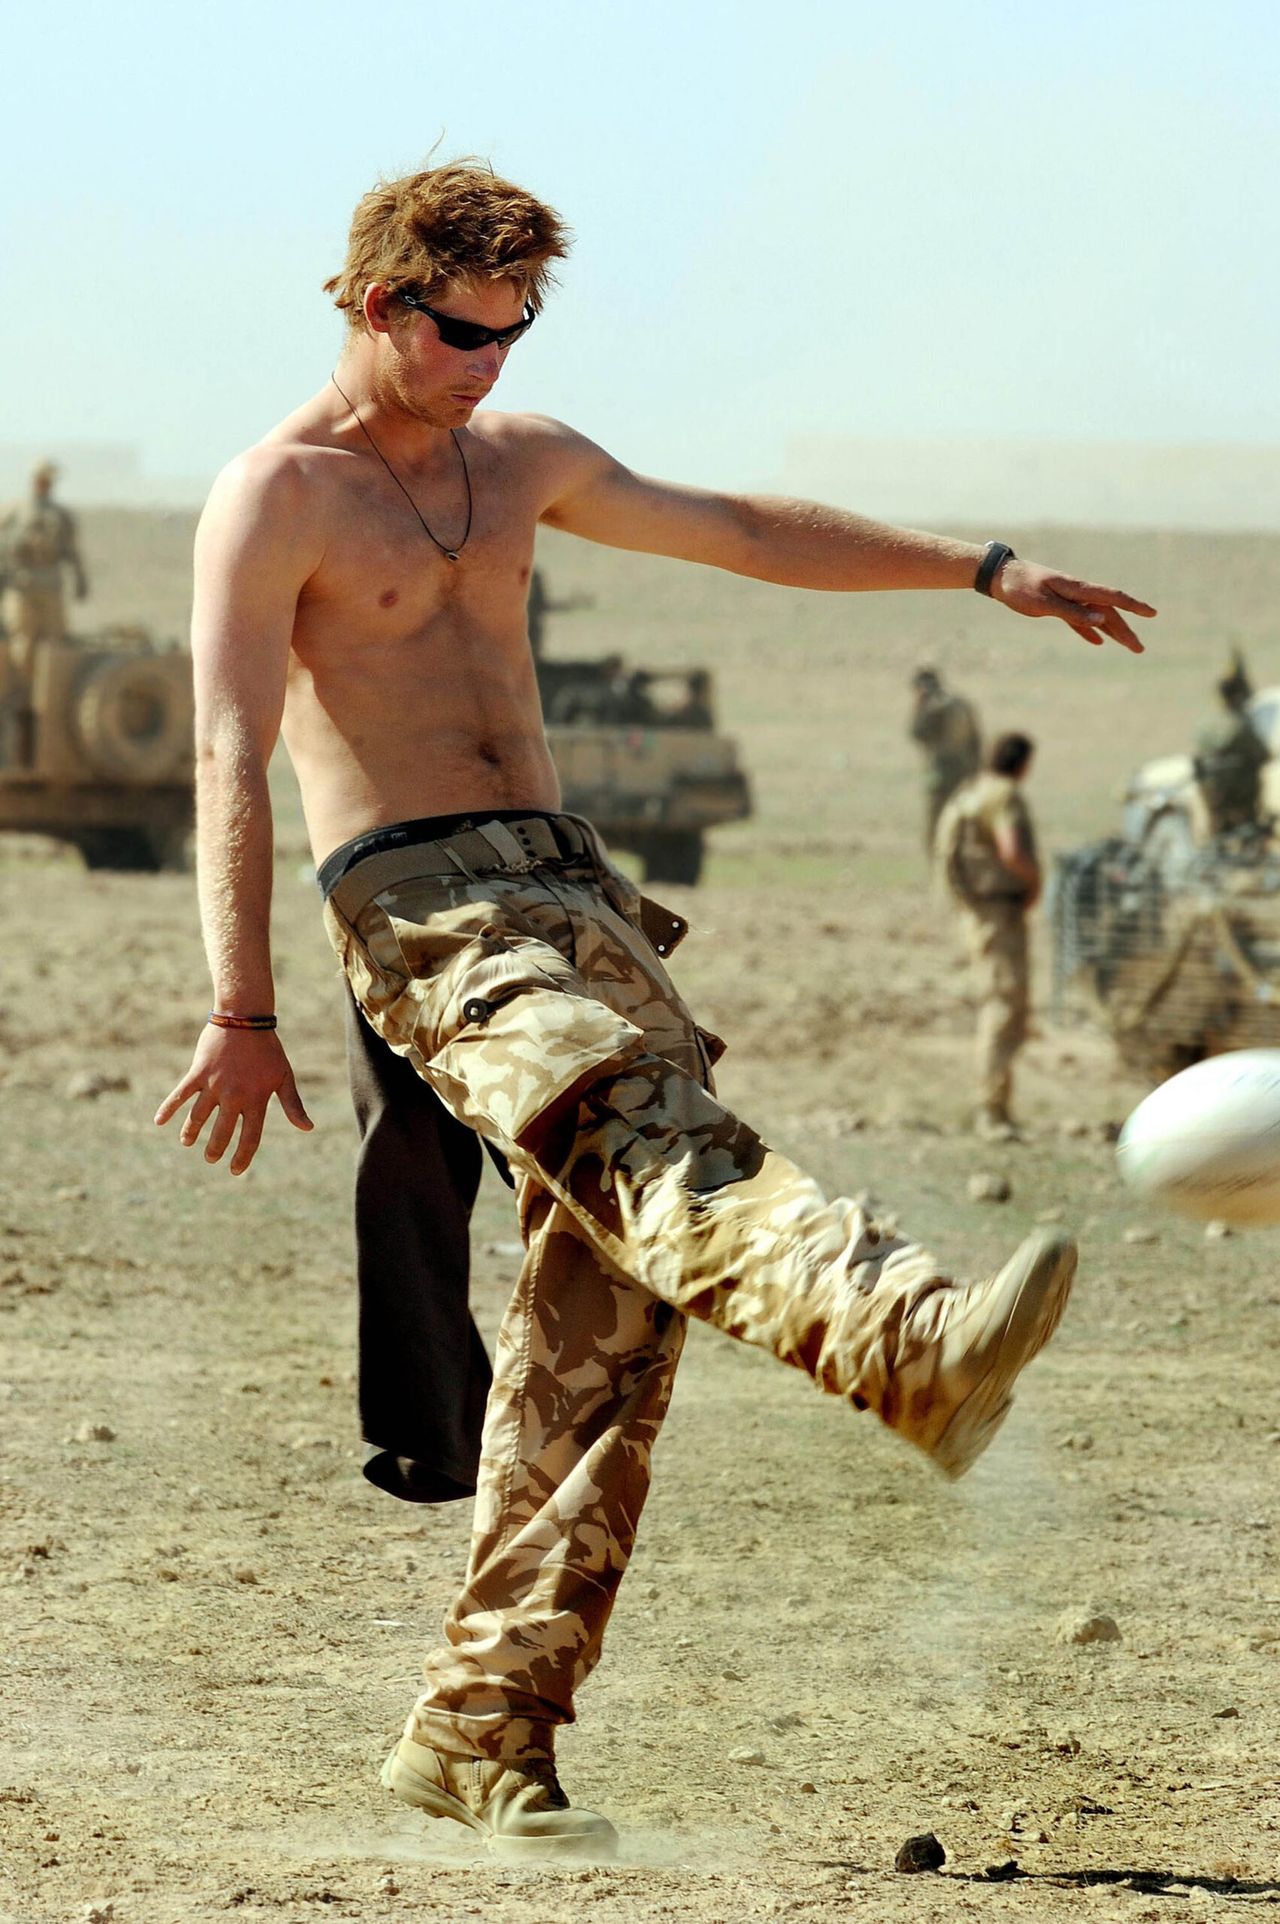 02/01/2008 - HELMAND PROVINCE -  AFGHANISTAN

PRINCE HARRY PRACTICES HIS RUGBY SKILLS WITH THE CREW OF HIS SPARTAN ARMOURED VECHICLE DURING A BREAK IN THEIR DUTIES IN THE DESERT IN HELMAND PROVINCE, SOUTHERN AFGHANISTAN.

BYLINE MUST READ: XPOSUREPHOTOS.COM

*NO UK USE UNTIL 02ND FEBRUARY 2008* *THIS IMAGE IS STRICTLY FOR PAPER AND MAGAZINE USE ONLY - NO WEB ALLOWED USAGE UNLESS PREVIOUSLY AGREED. PLEASE TELEPHONE 020 7377 2770*